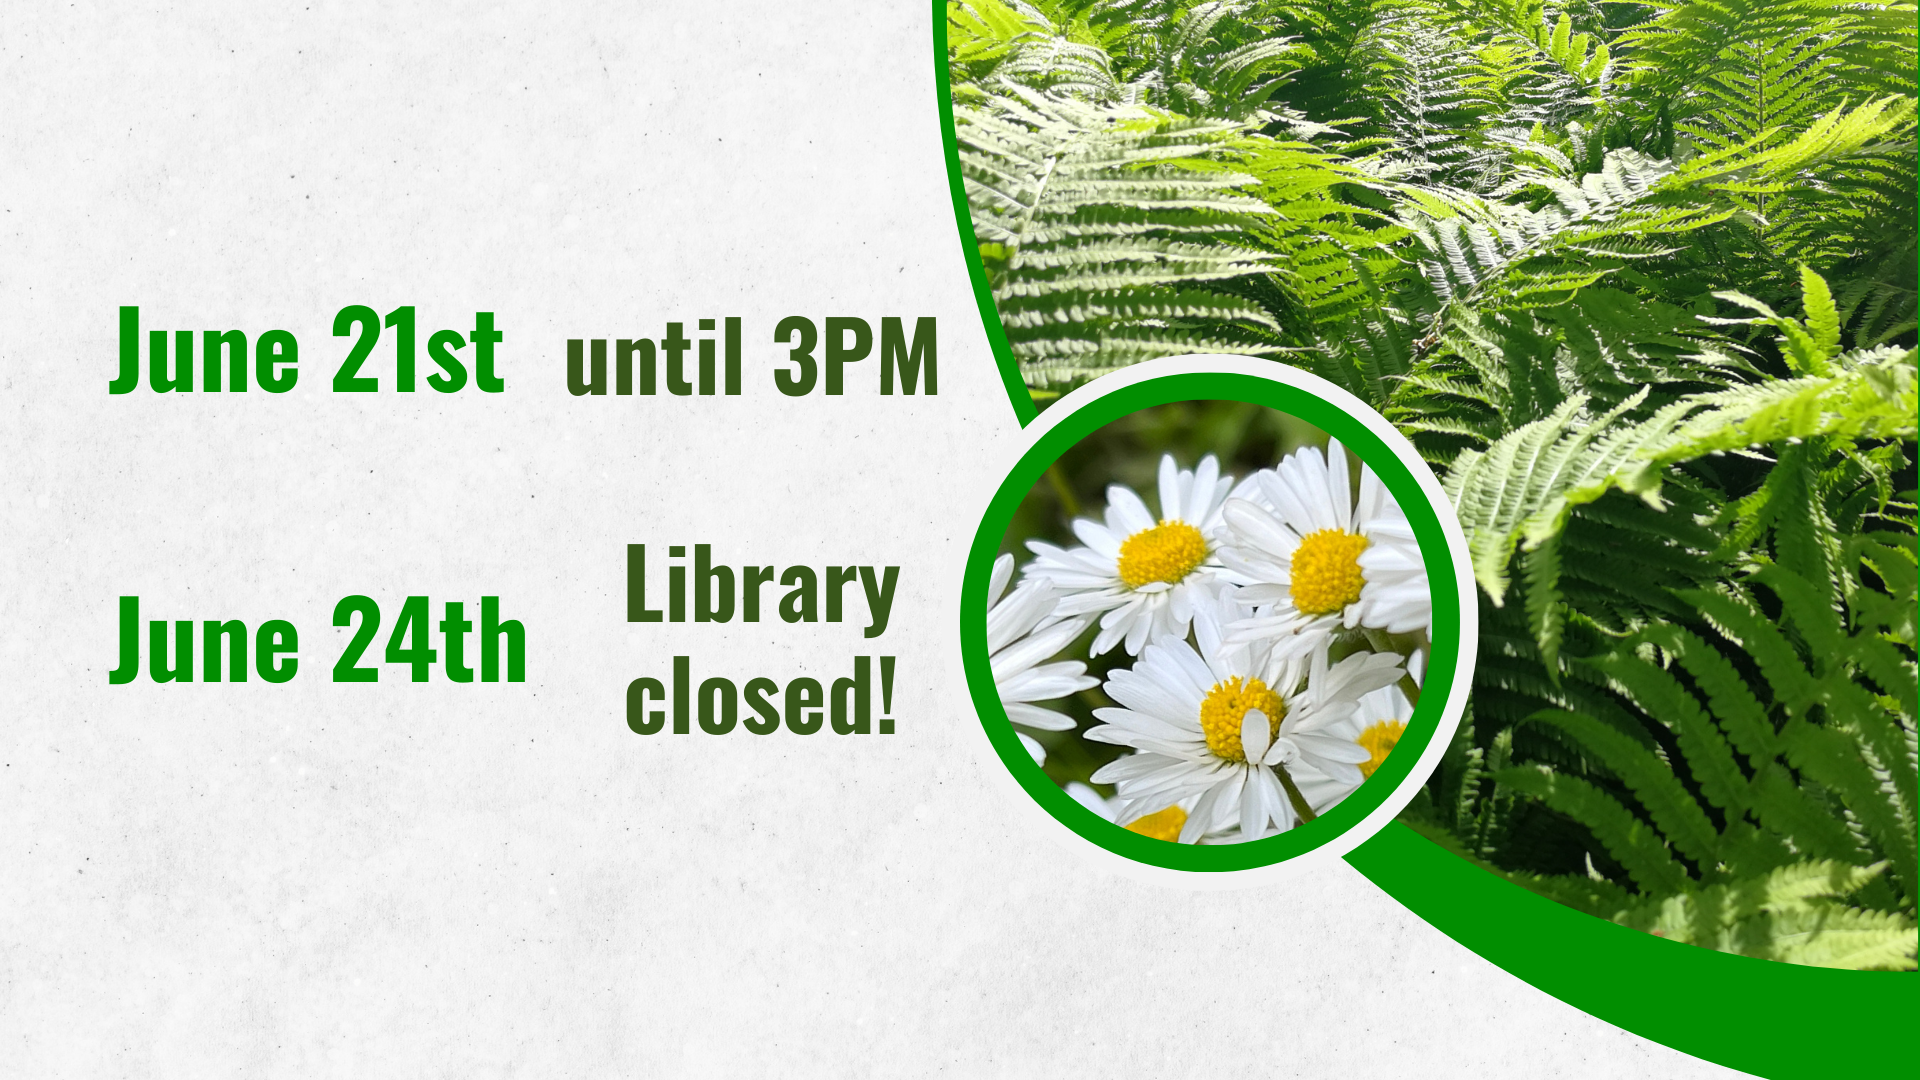 Library working hours. June 21st - until 3PM. June 24th - closed.